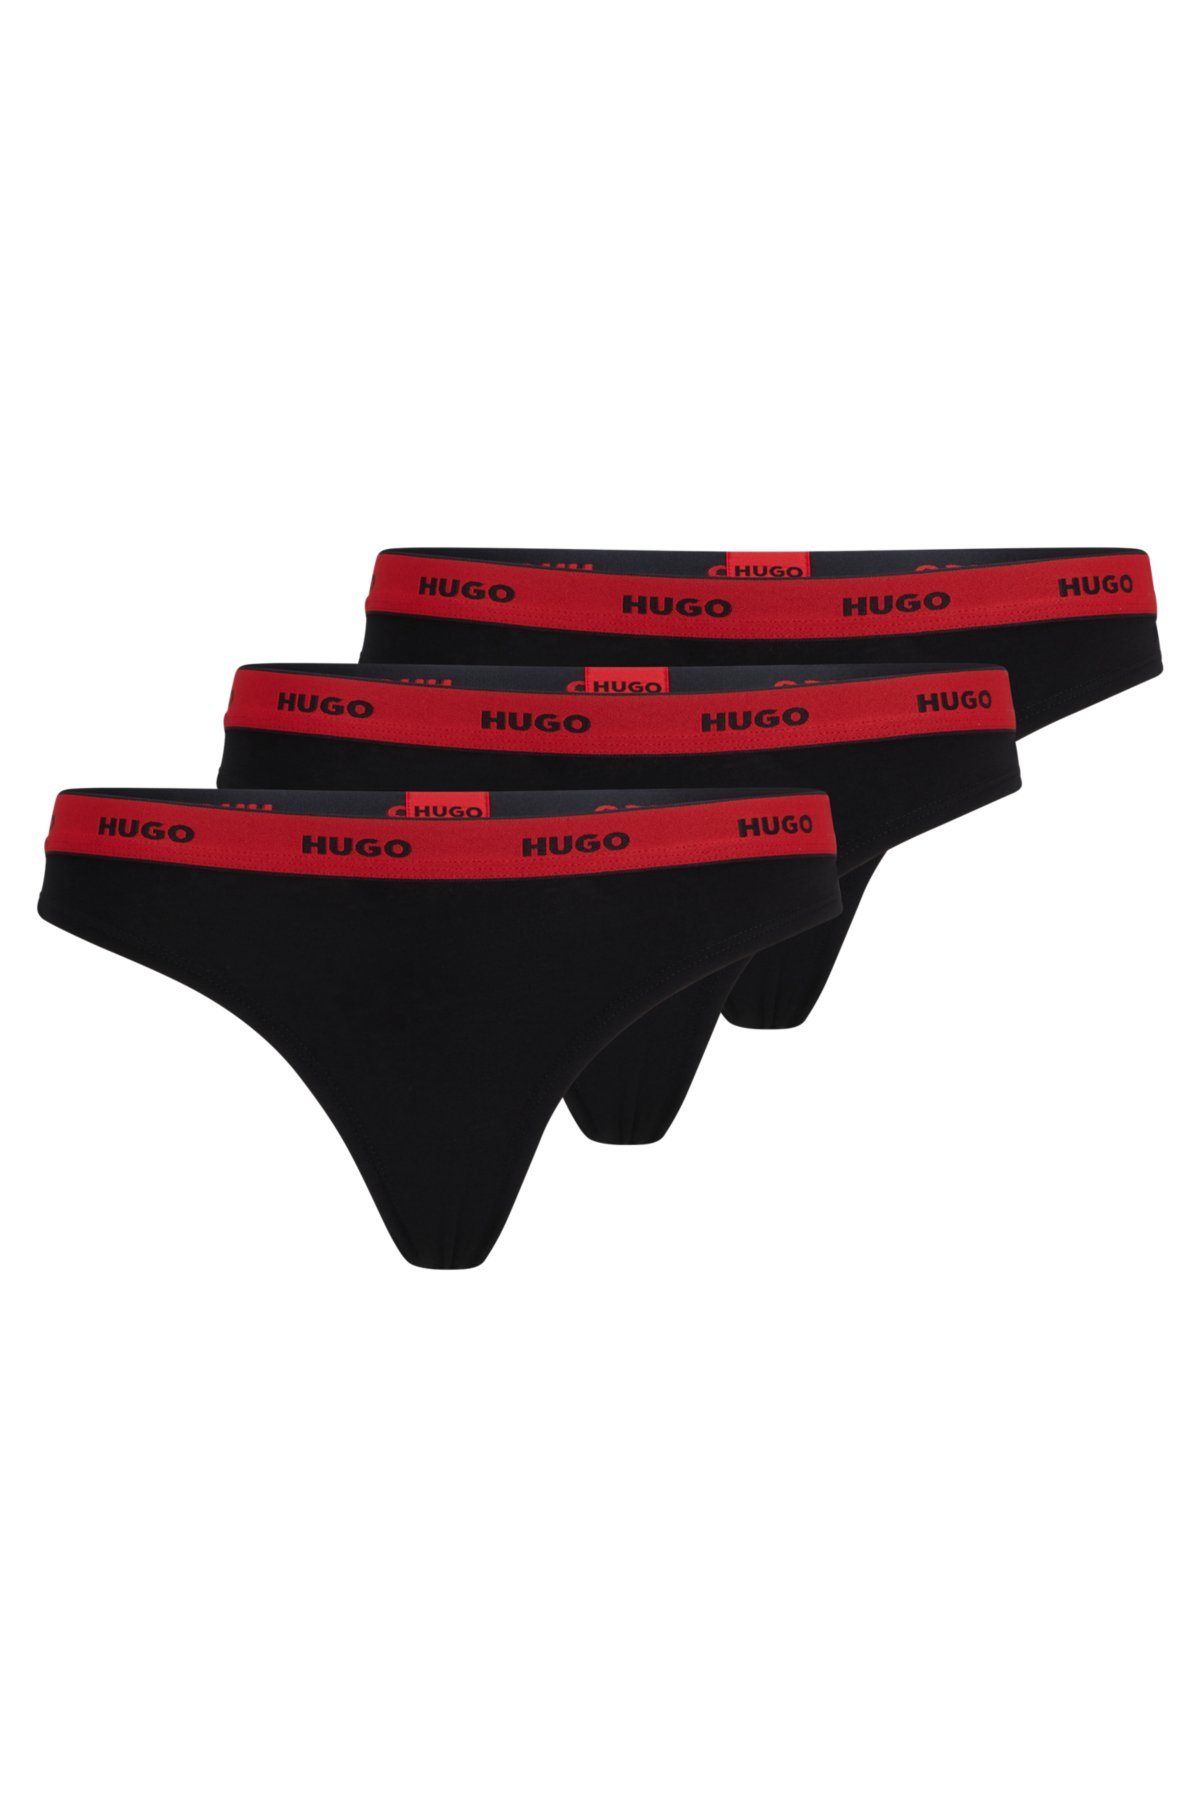 stretch thongs - Three-pack cotton HUGO logo-waistband in of